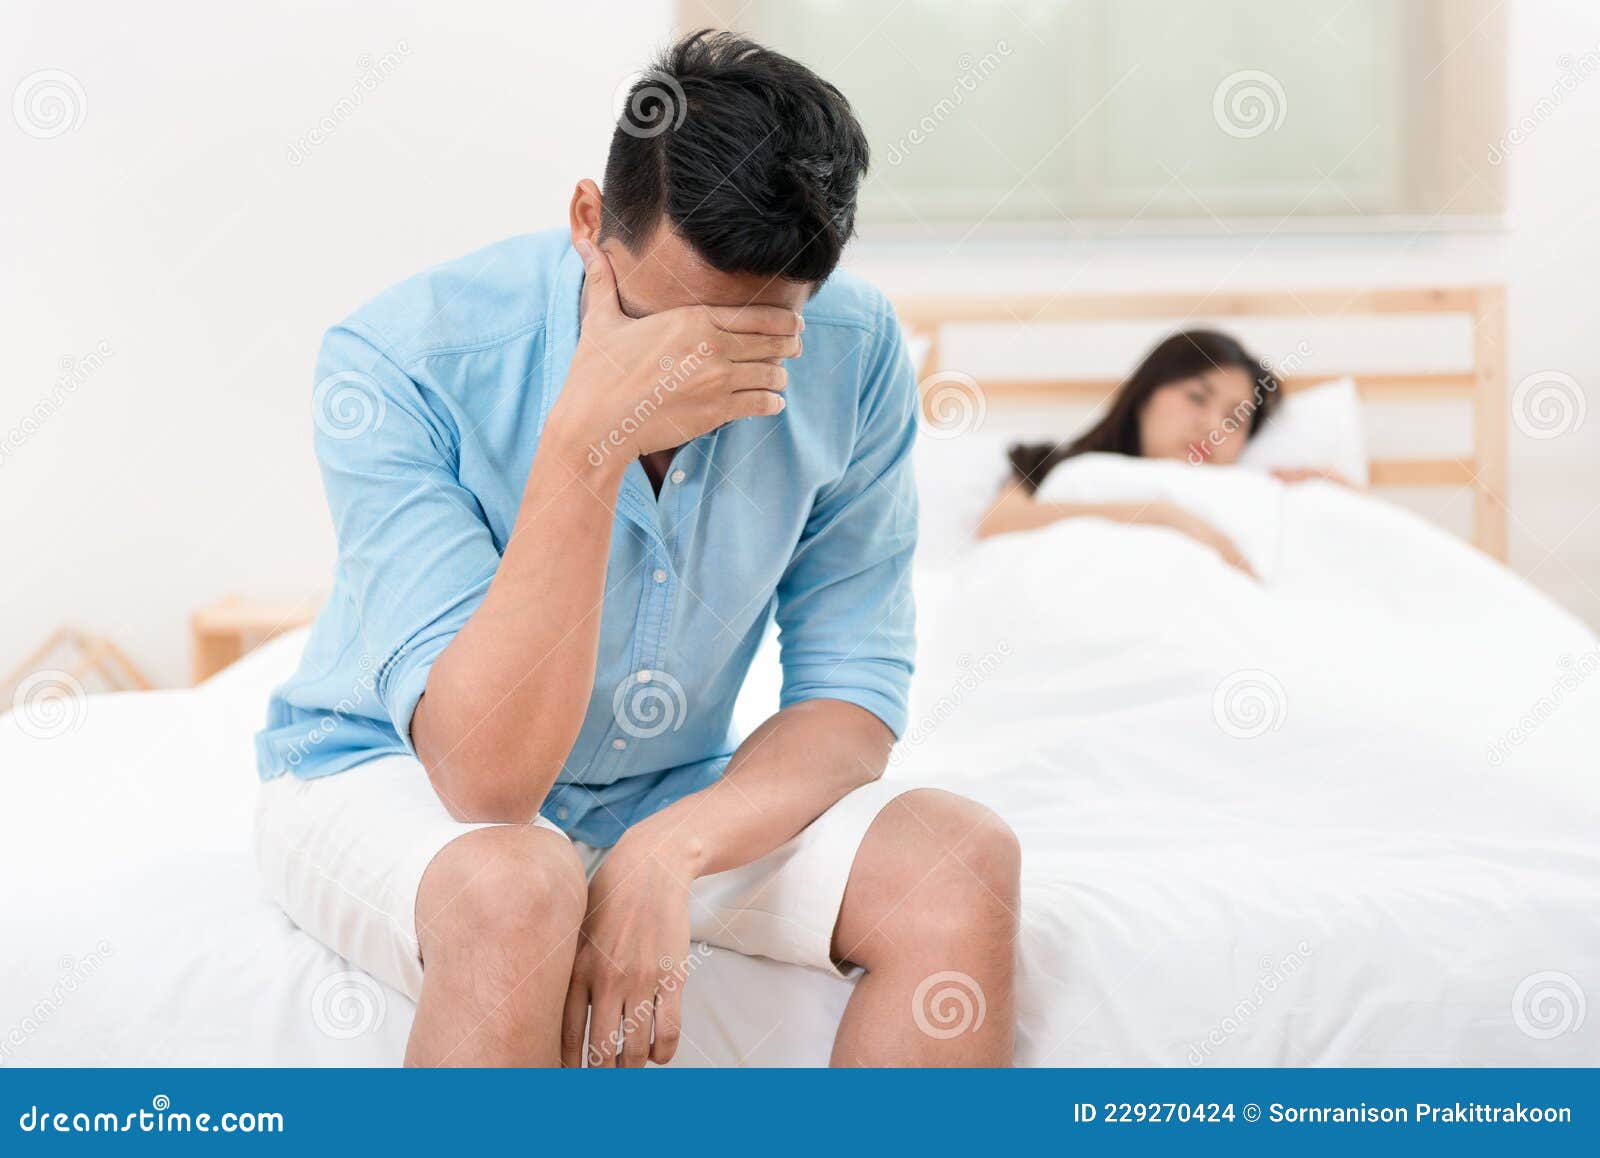 Husband Unhappy and Disappointed Stock Photo photo